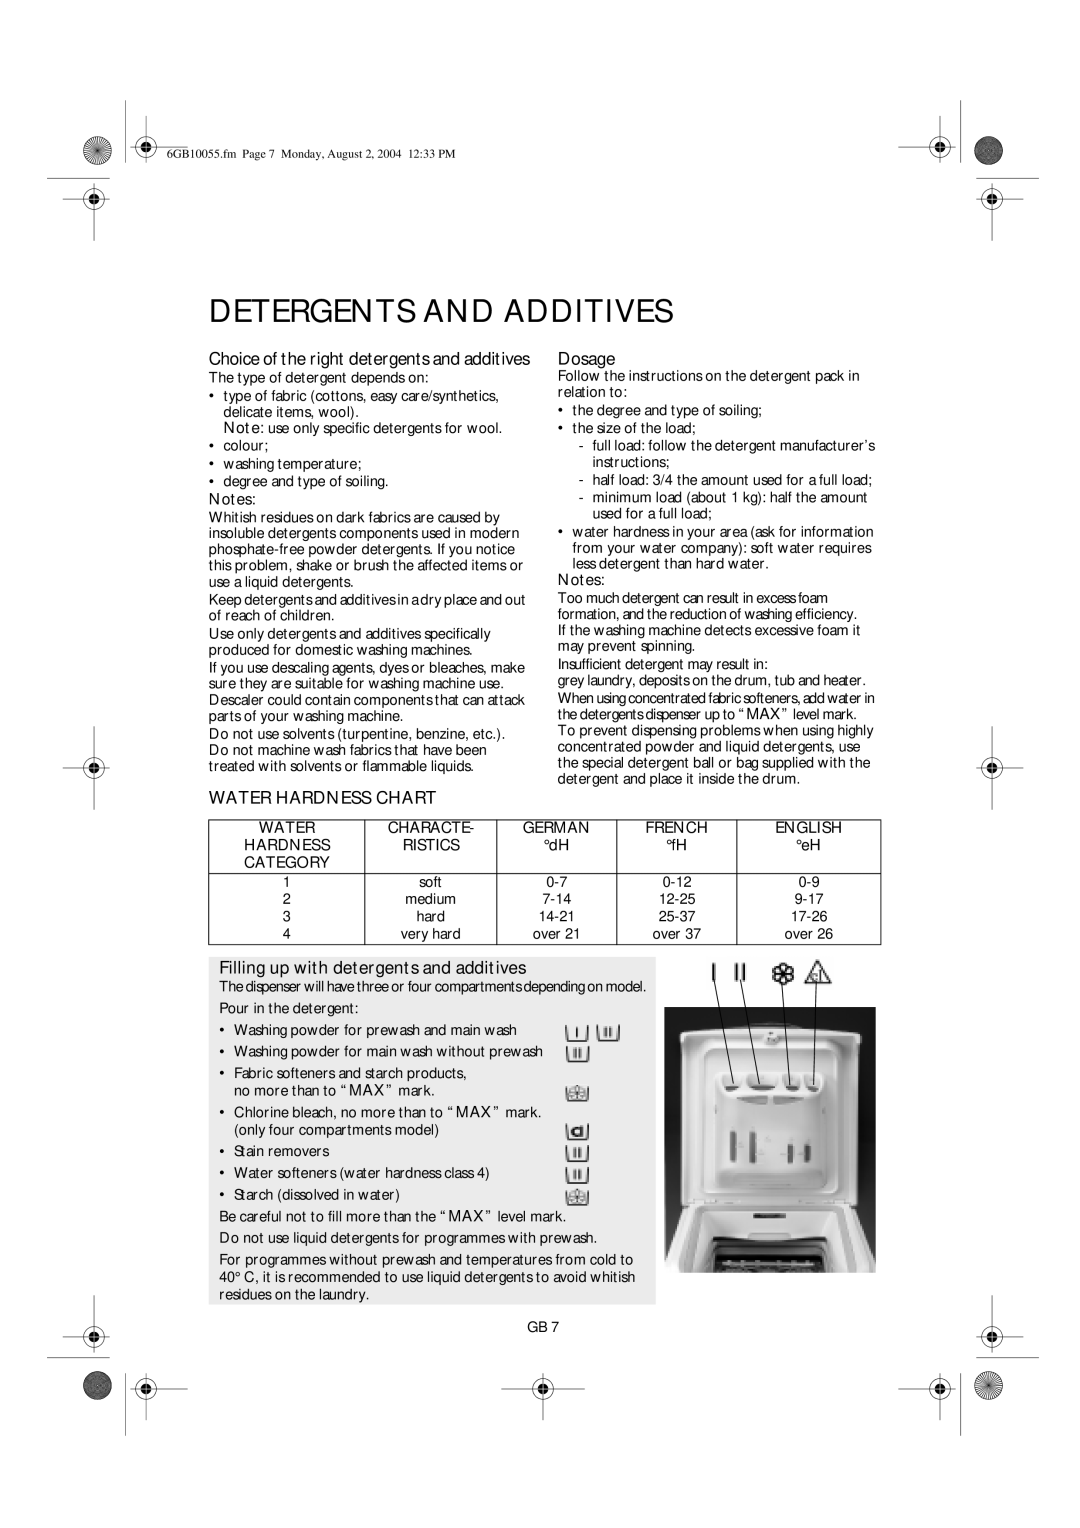 Smeg S600TL Dosage, Water Hardness Chart, Filling up with detergents and additives, Characte, German, French, English 